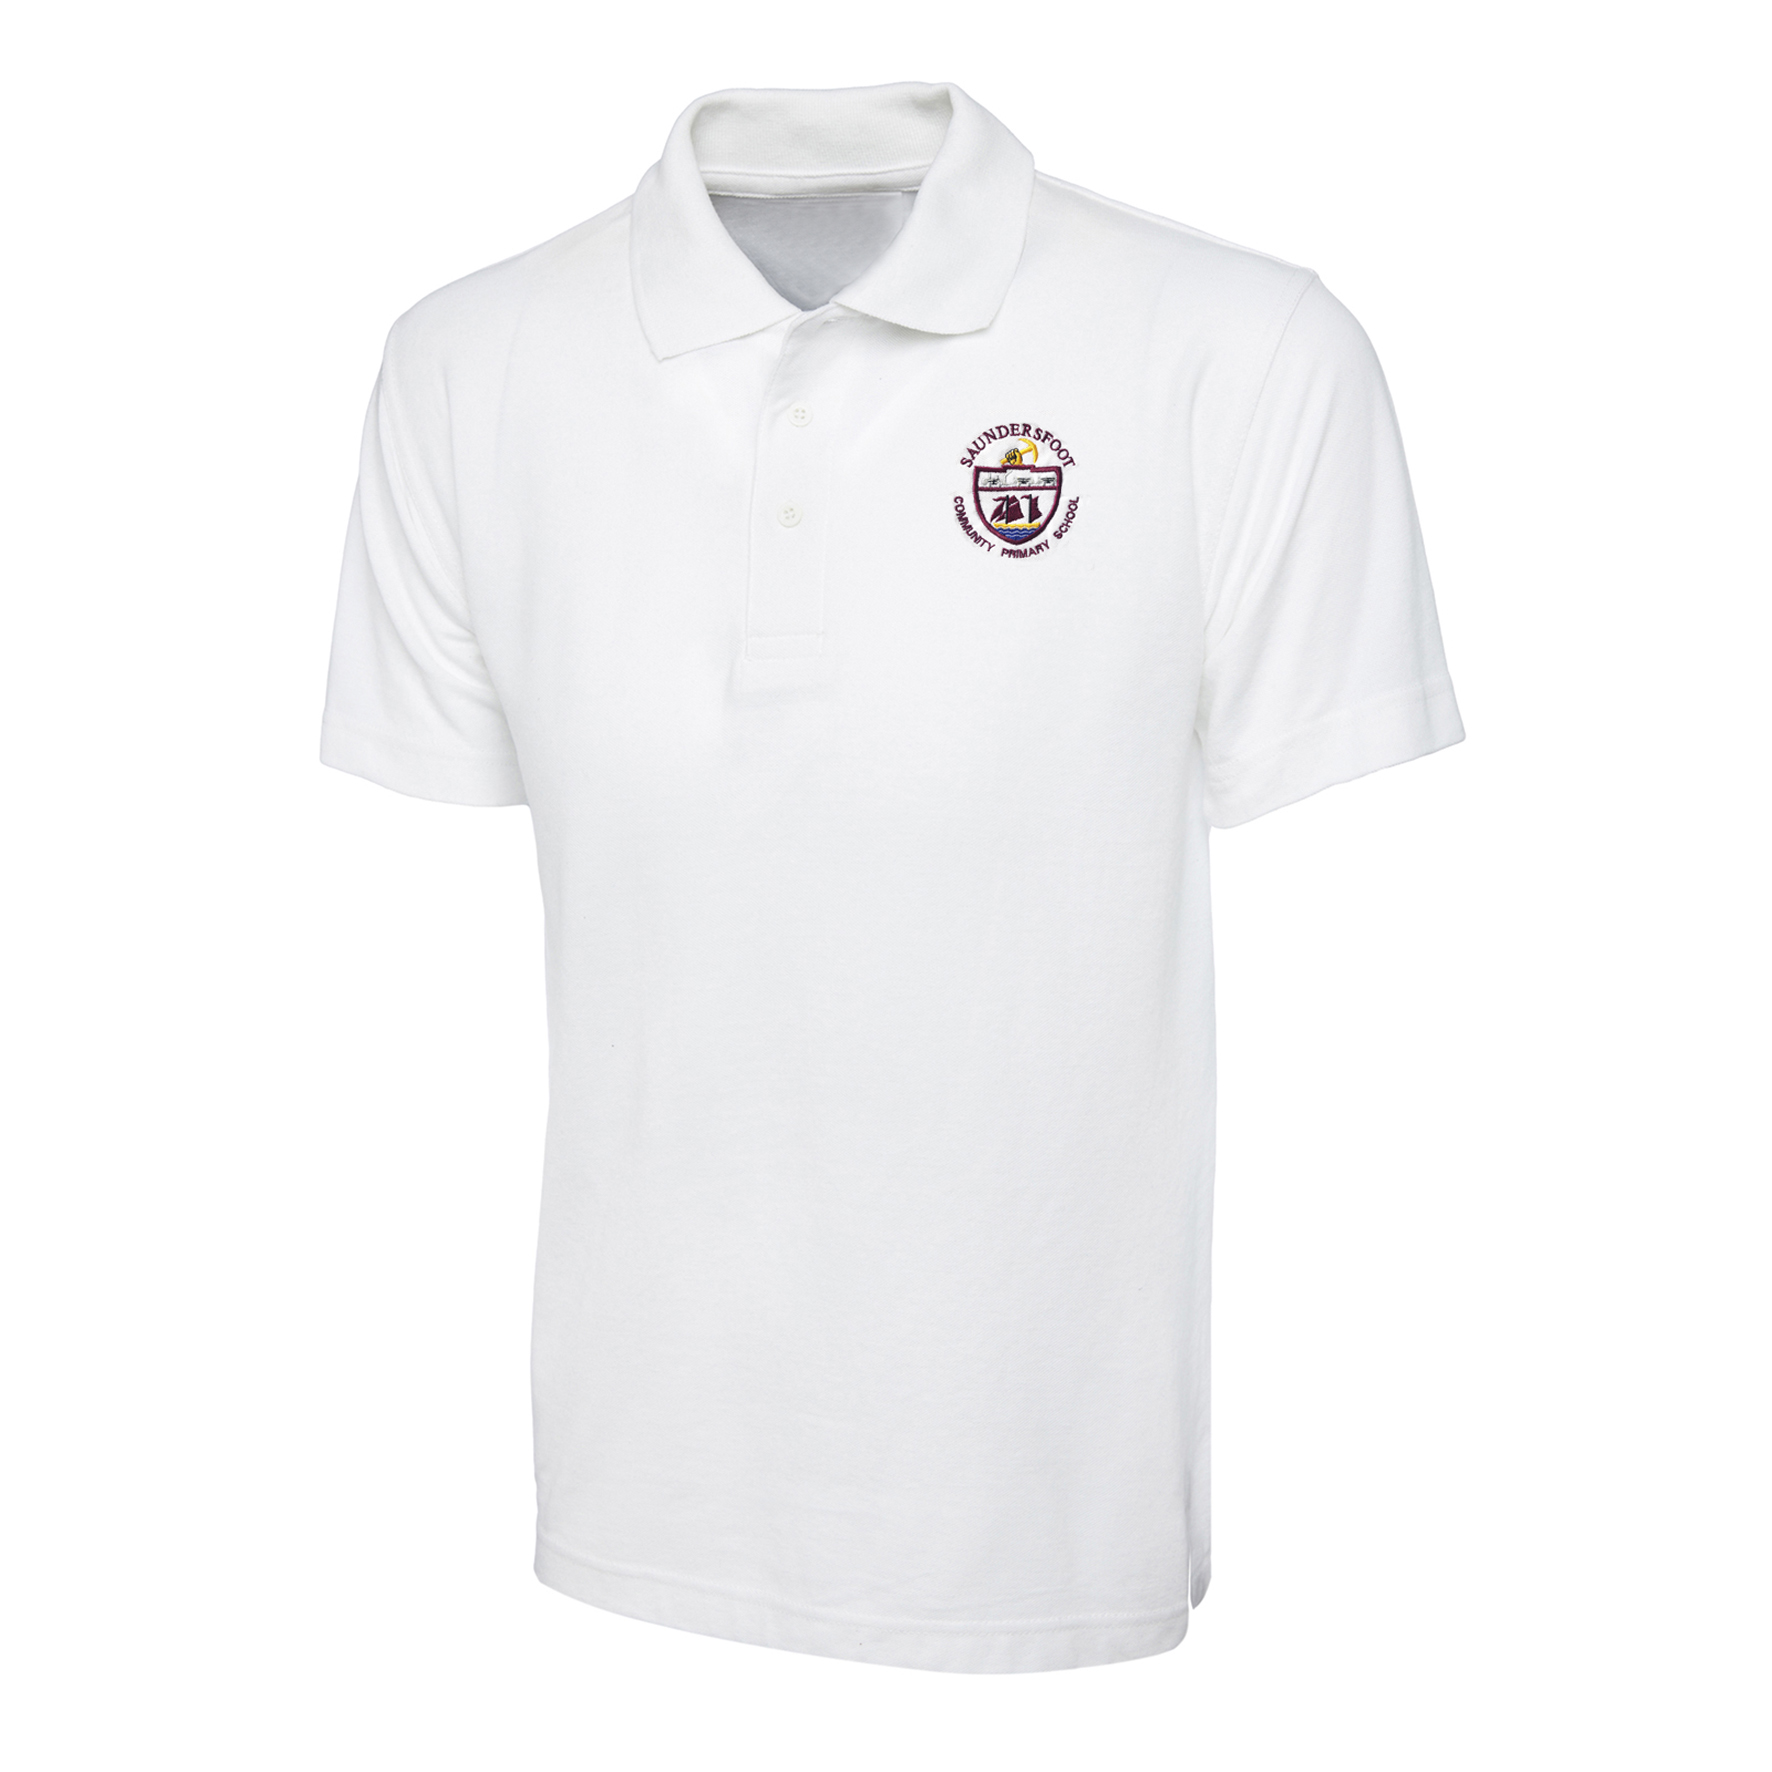 Saundersfoot CP School Unisex White Polo Shirt - Tees R Us Embroidery ...